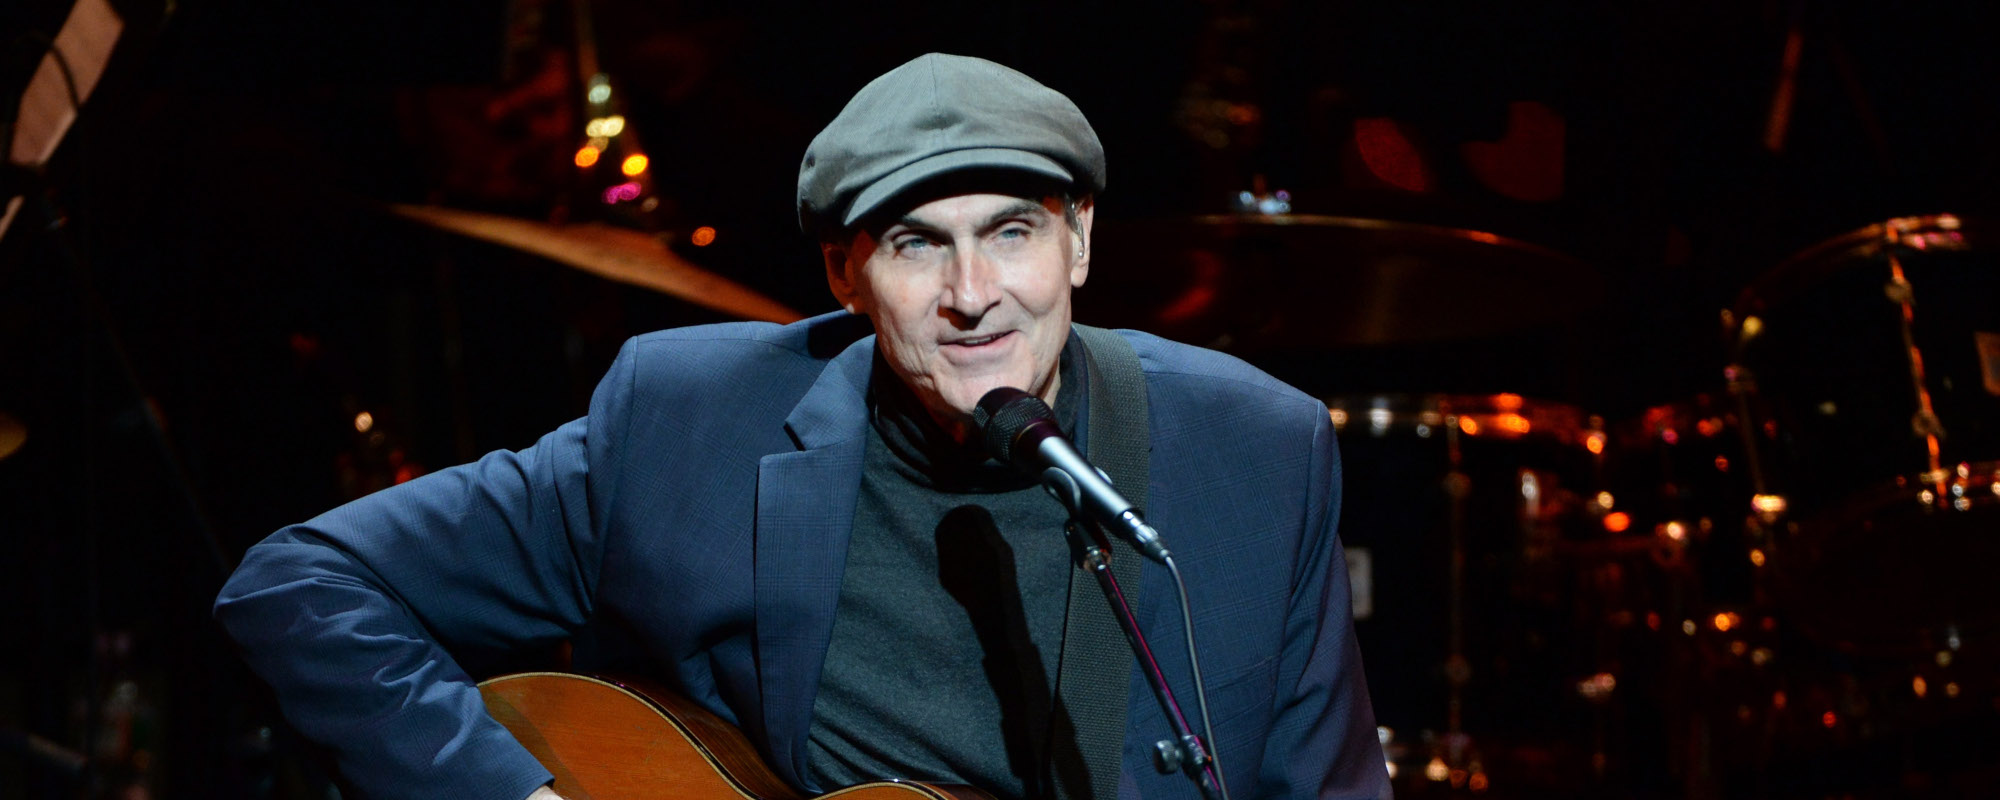 7 Iconic Albums You Didn’t Know Feature James Taylor